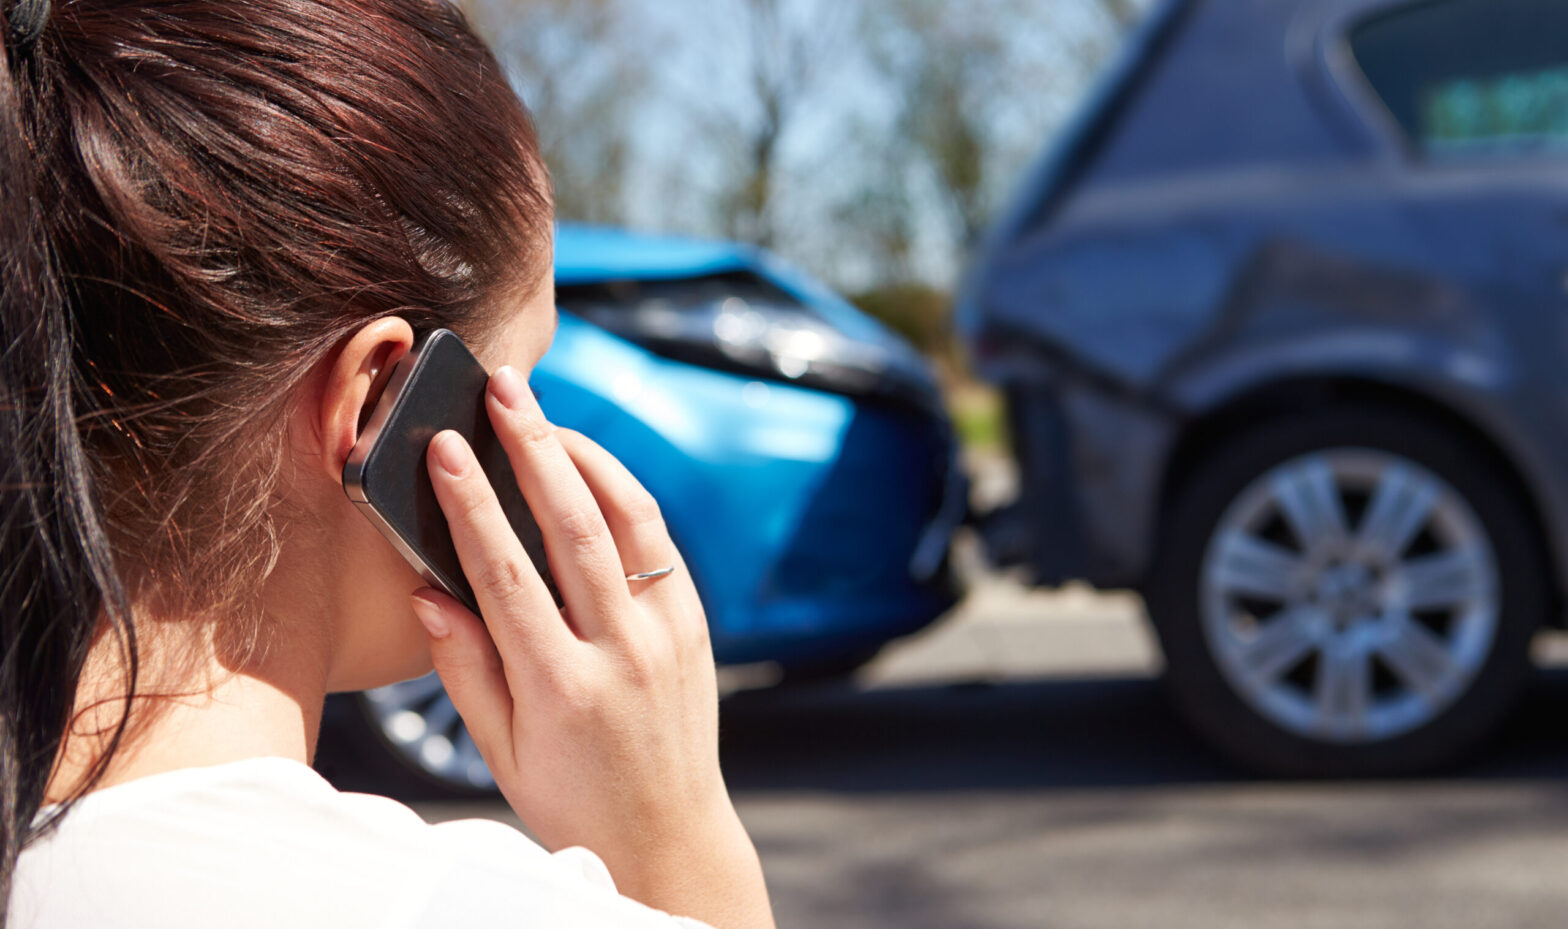 Call our firm for information on Car accident damages you may be entitled to!